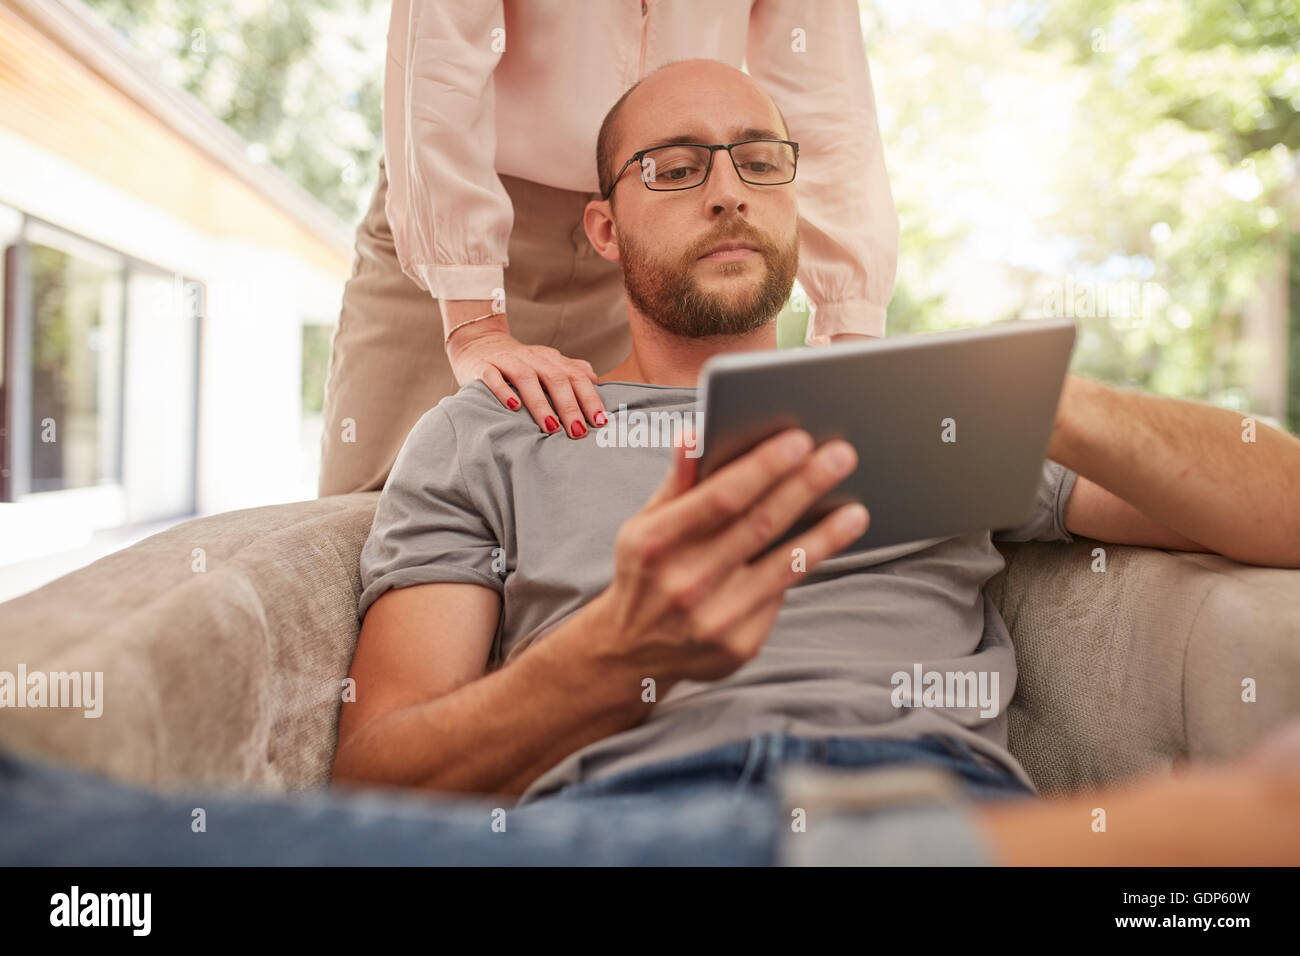 Indoor shot of a mature man sitting on sofa using digital tablet, with woman standing behind him. Couple at home in living room. Stock Photo